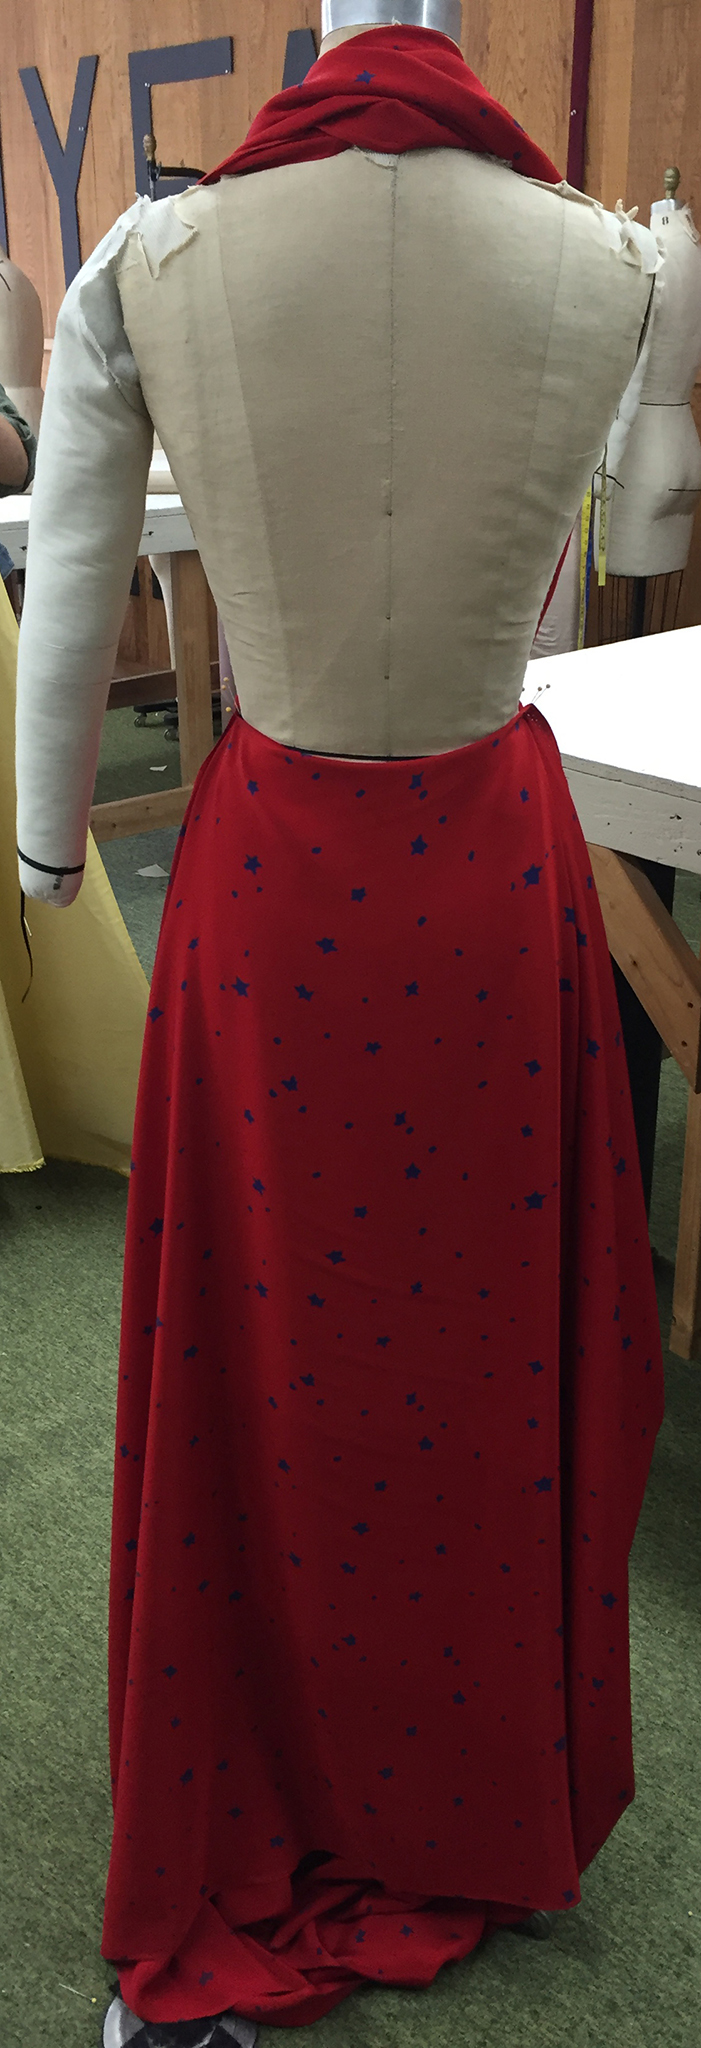 Red silk crepe with blue stars draped over a dress form.